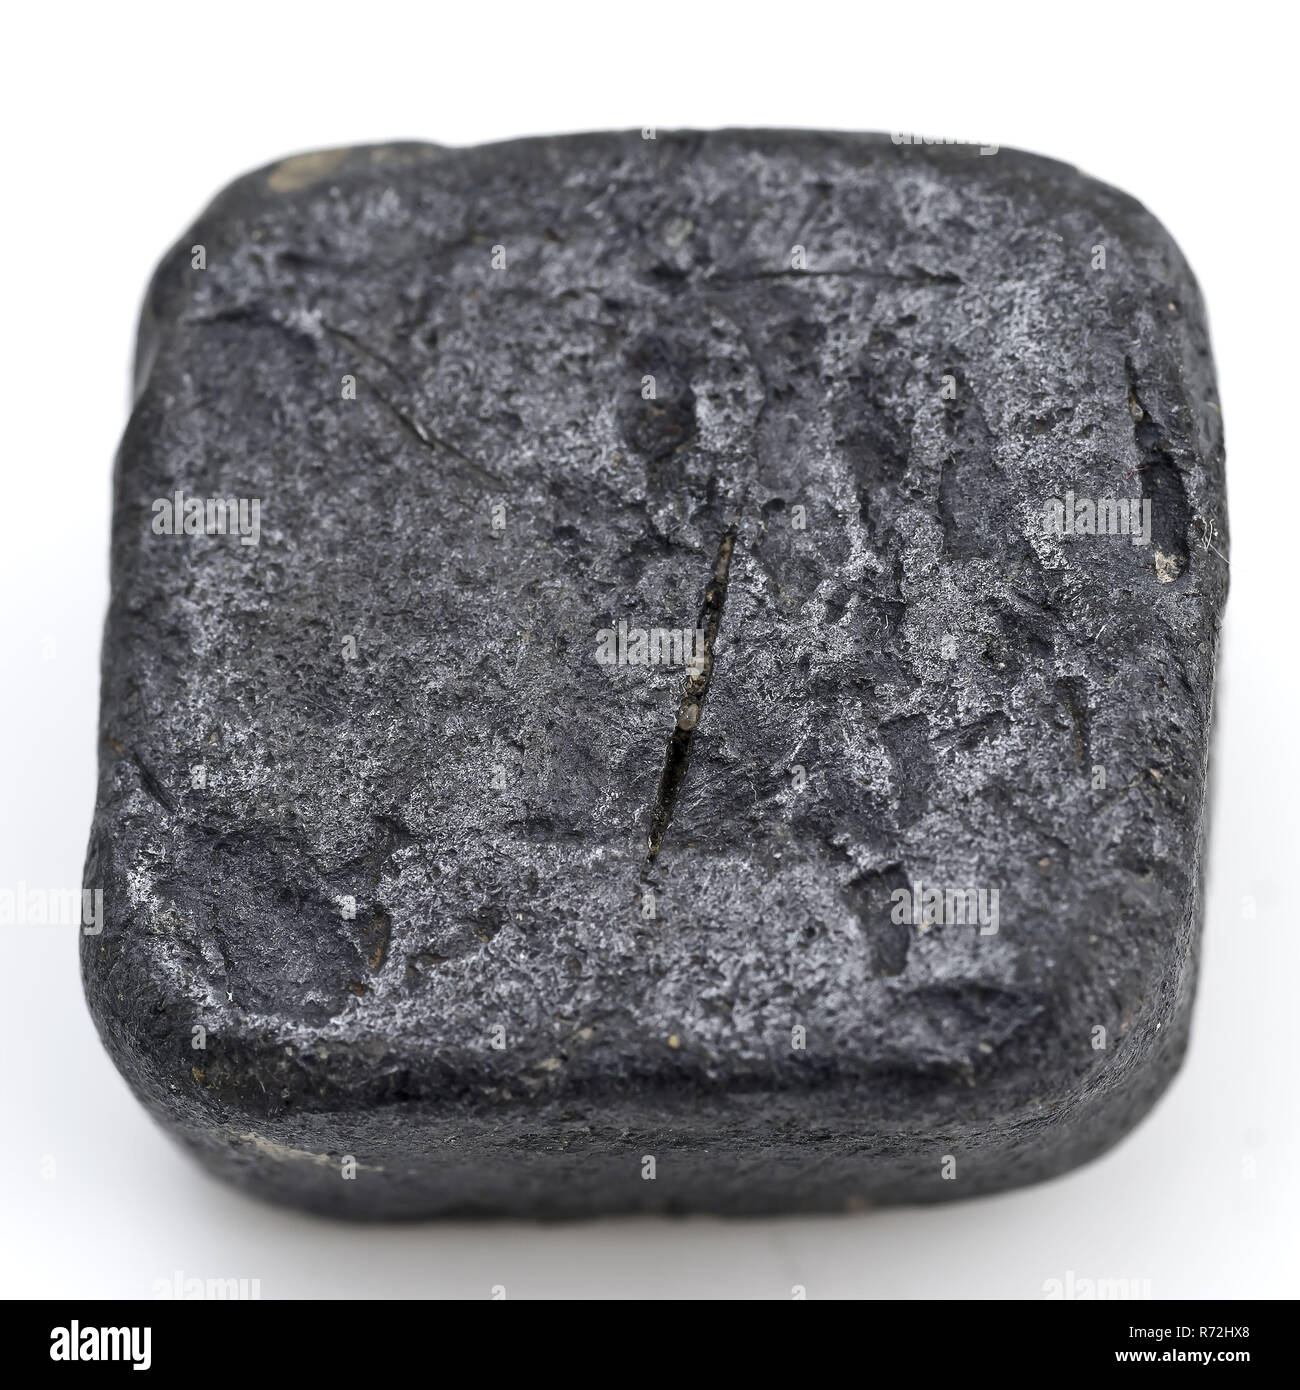 Rectangular solid lead block, artifact soil find lead metal, gram cast Rectangular solid metal block. Unnoticed and function unknown archeology Rotterdam railway tunnel Soil discovery Rotterdam tunnel trajectory. Stock Photo